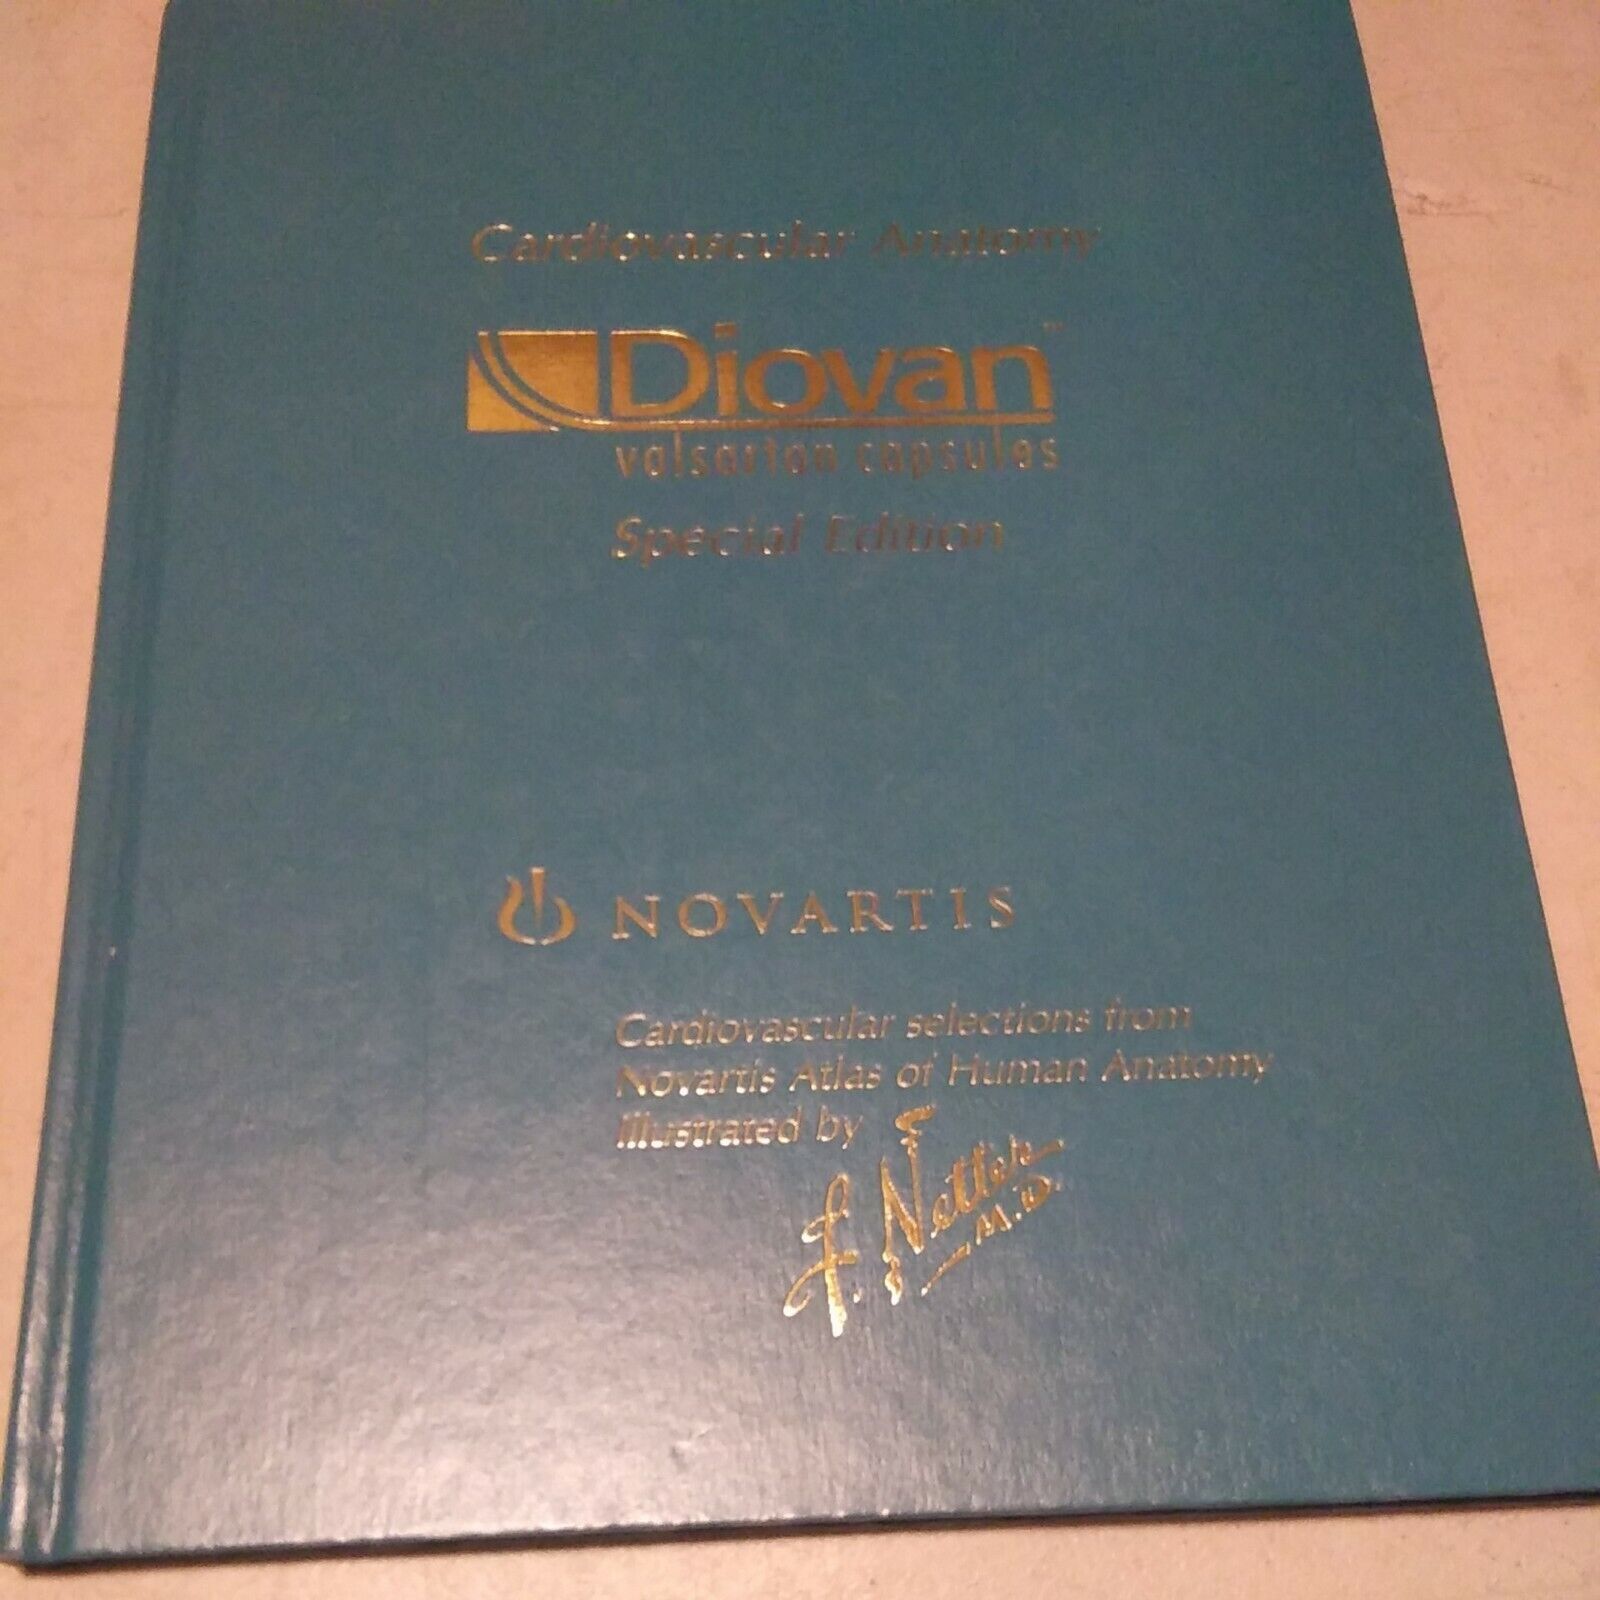 Cardiovascular Anatomy - Selections from Norvatis - Diovan Special Edition